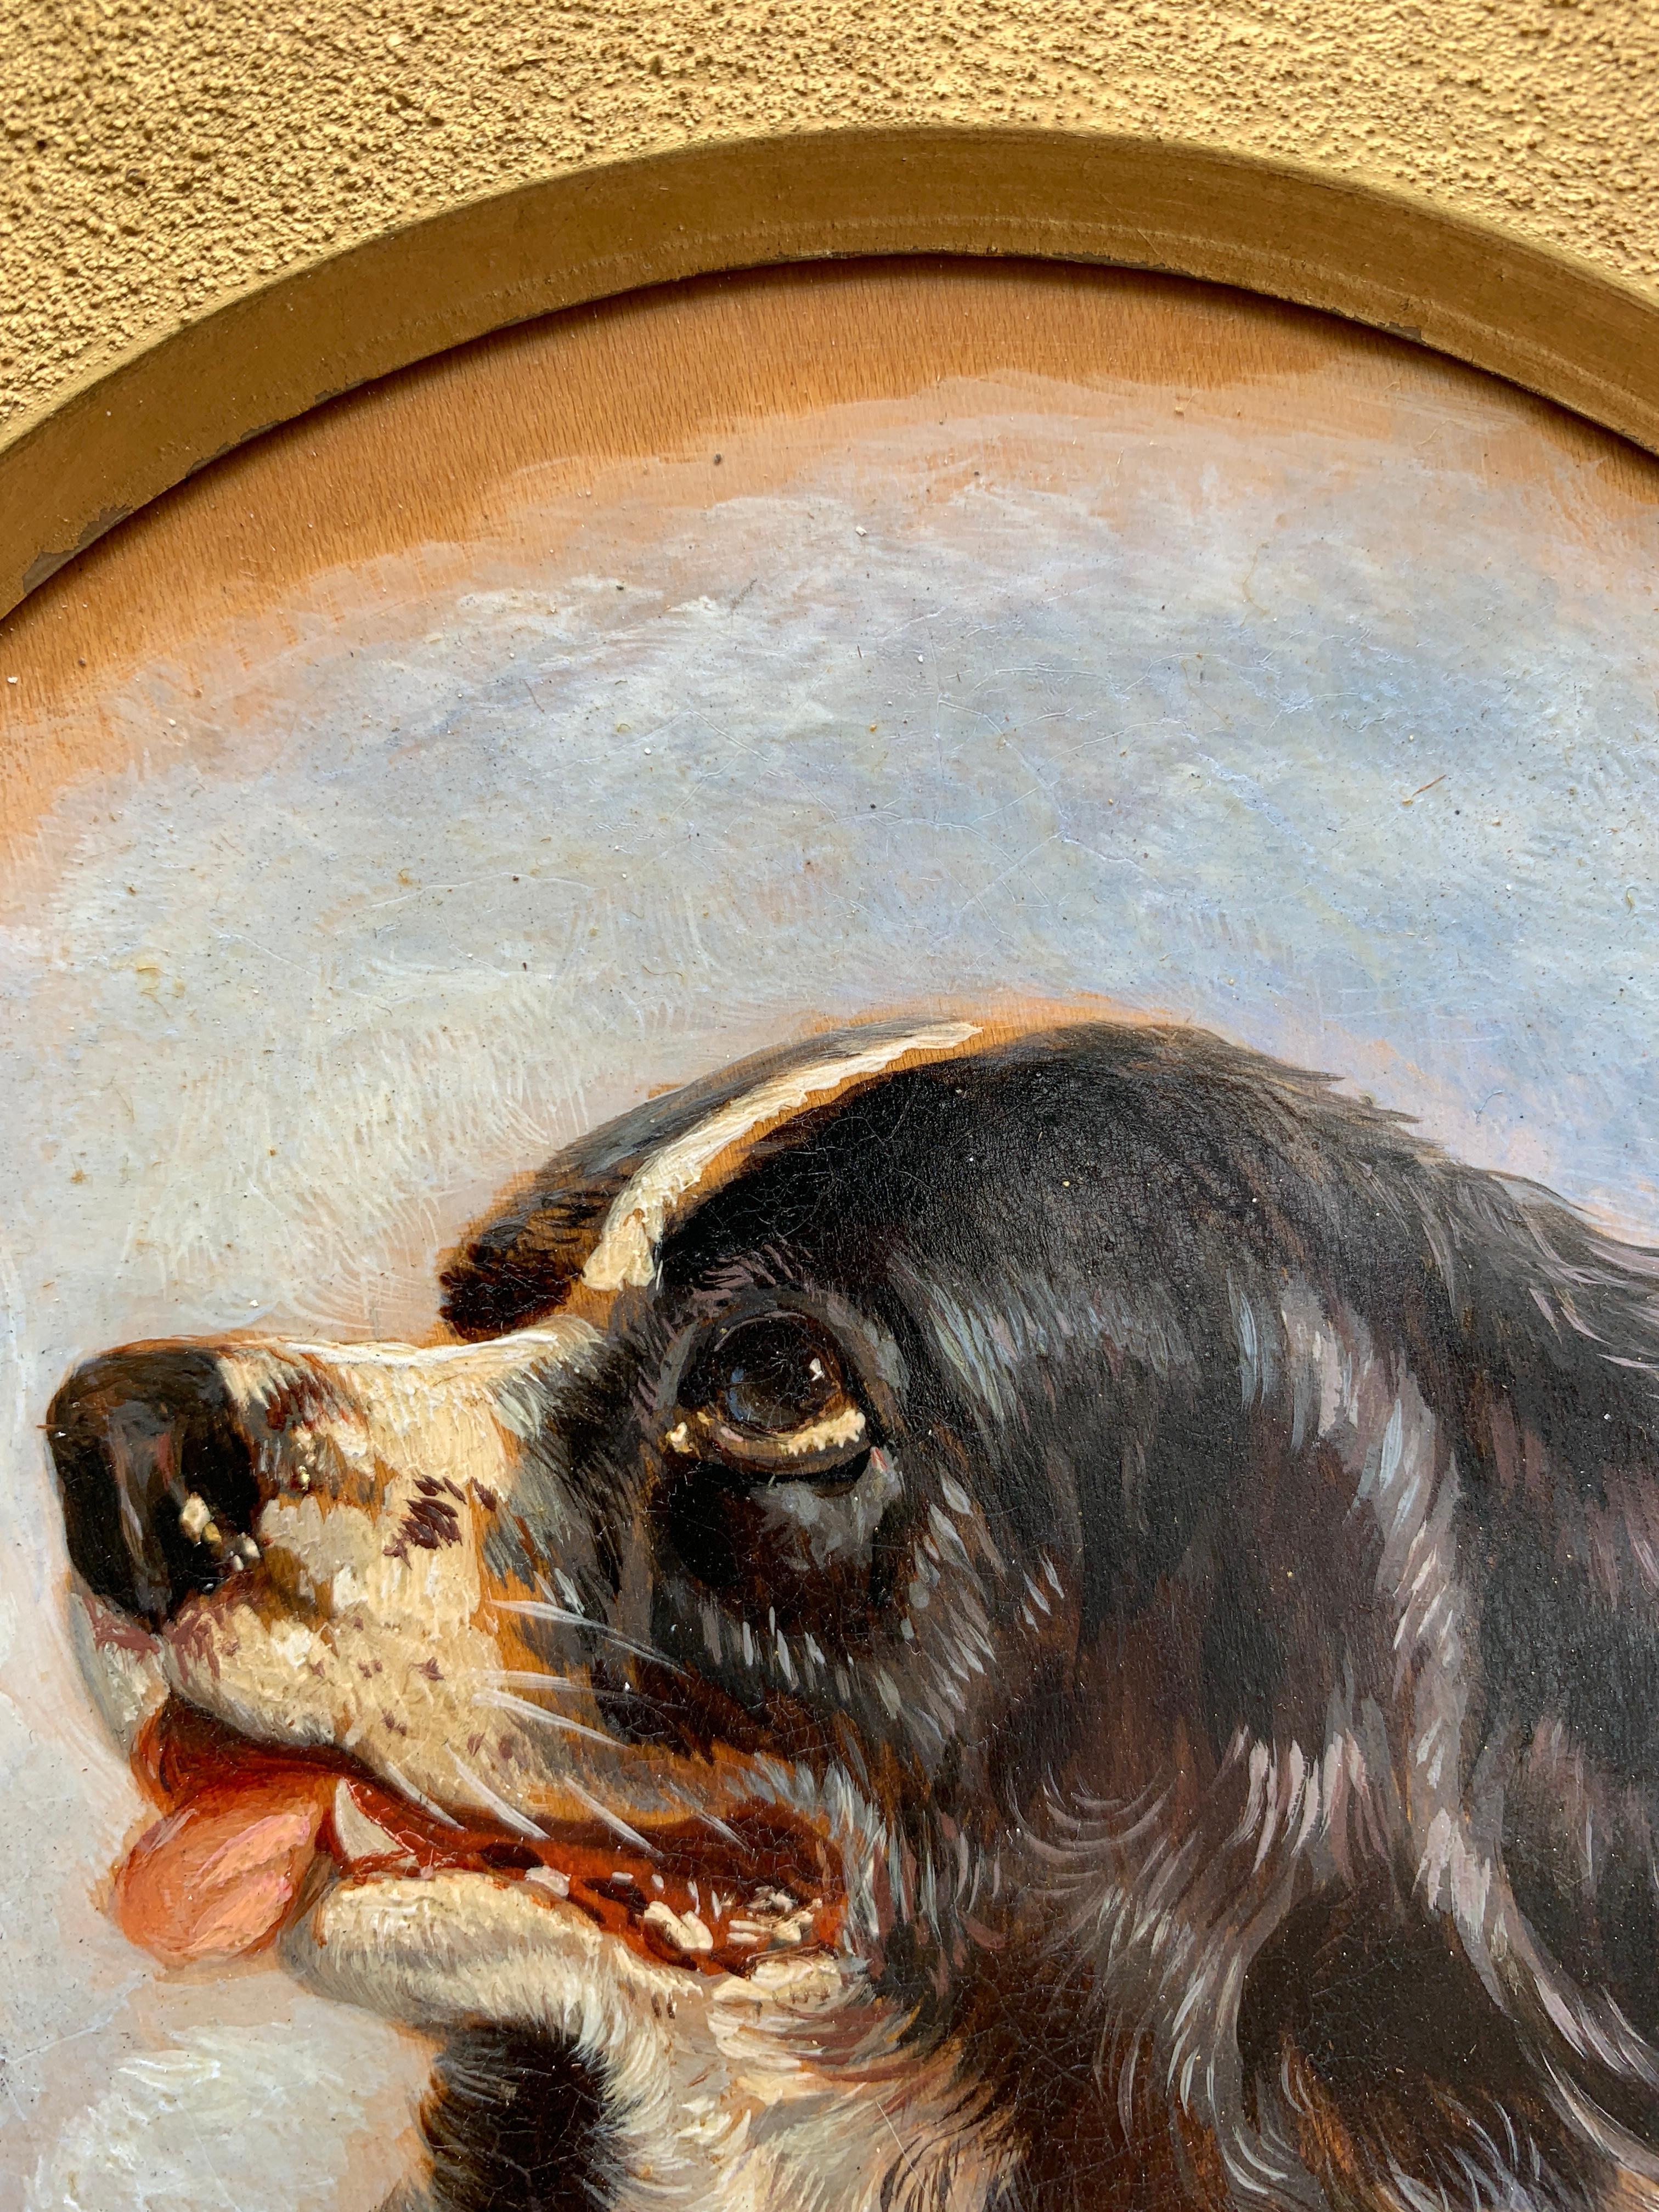 English Antique oil painting of an English Spaniel dog head - Victorian Painting by John Frederick Herring Jr.